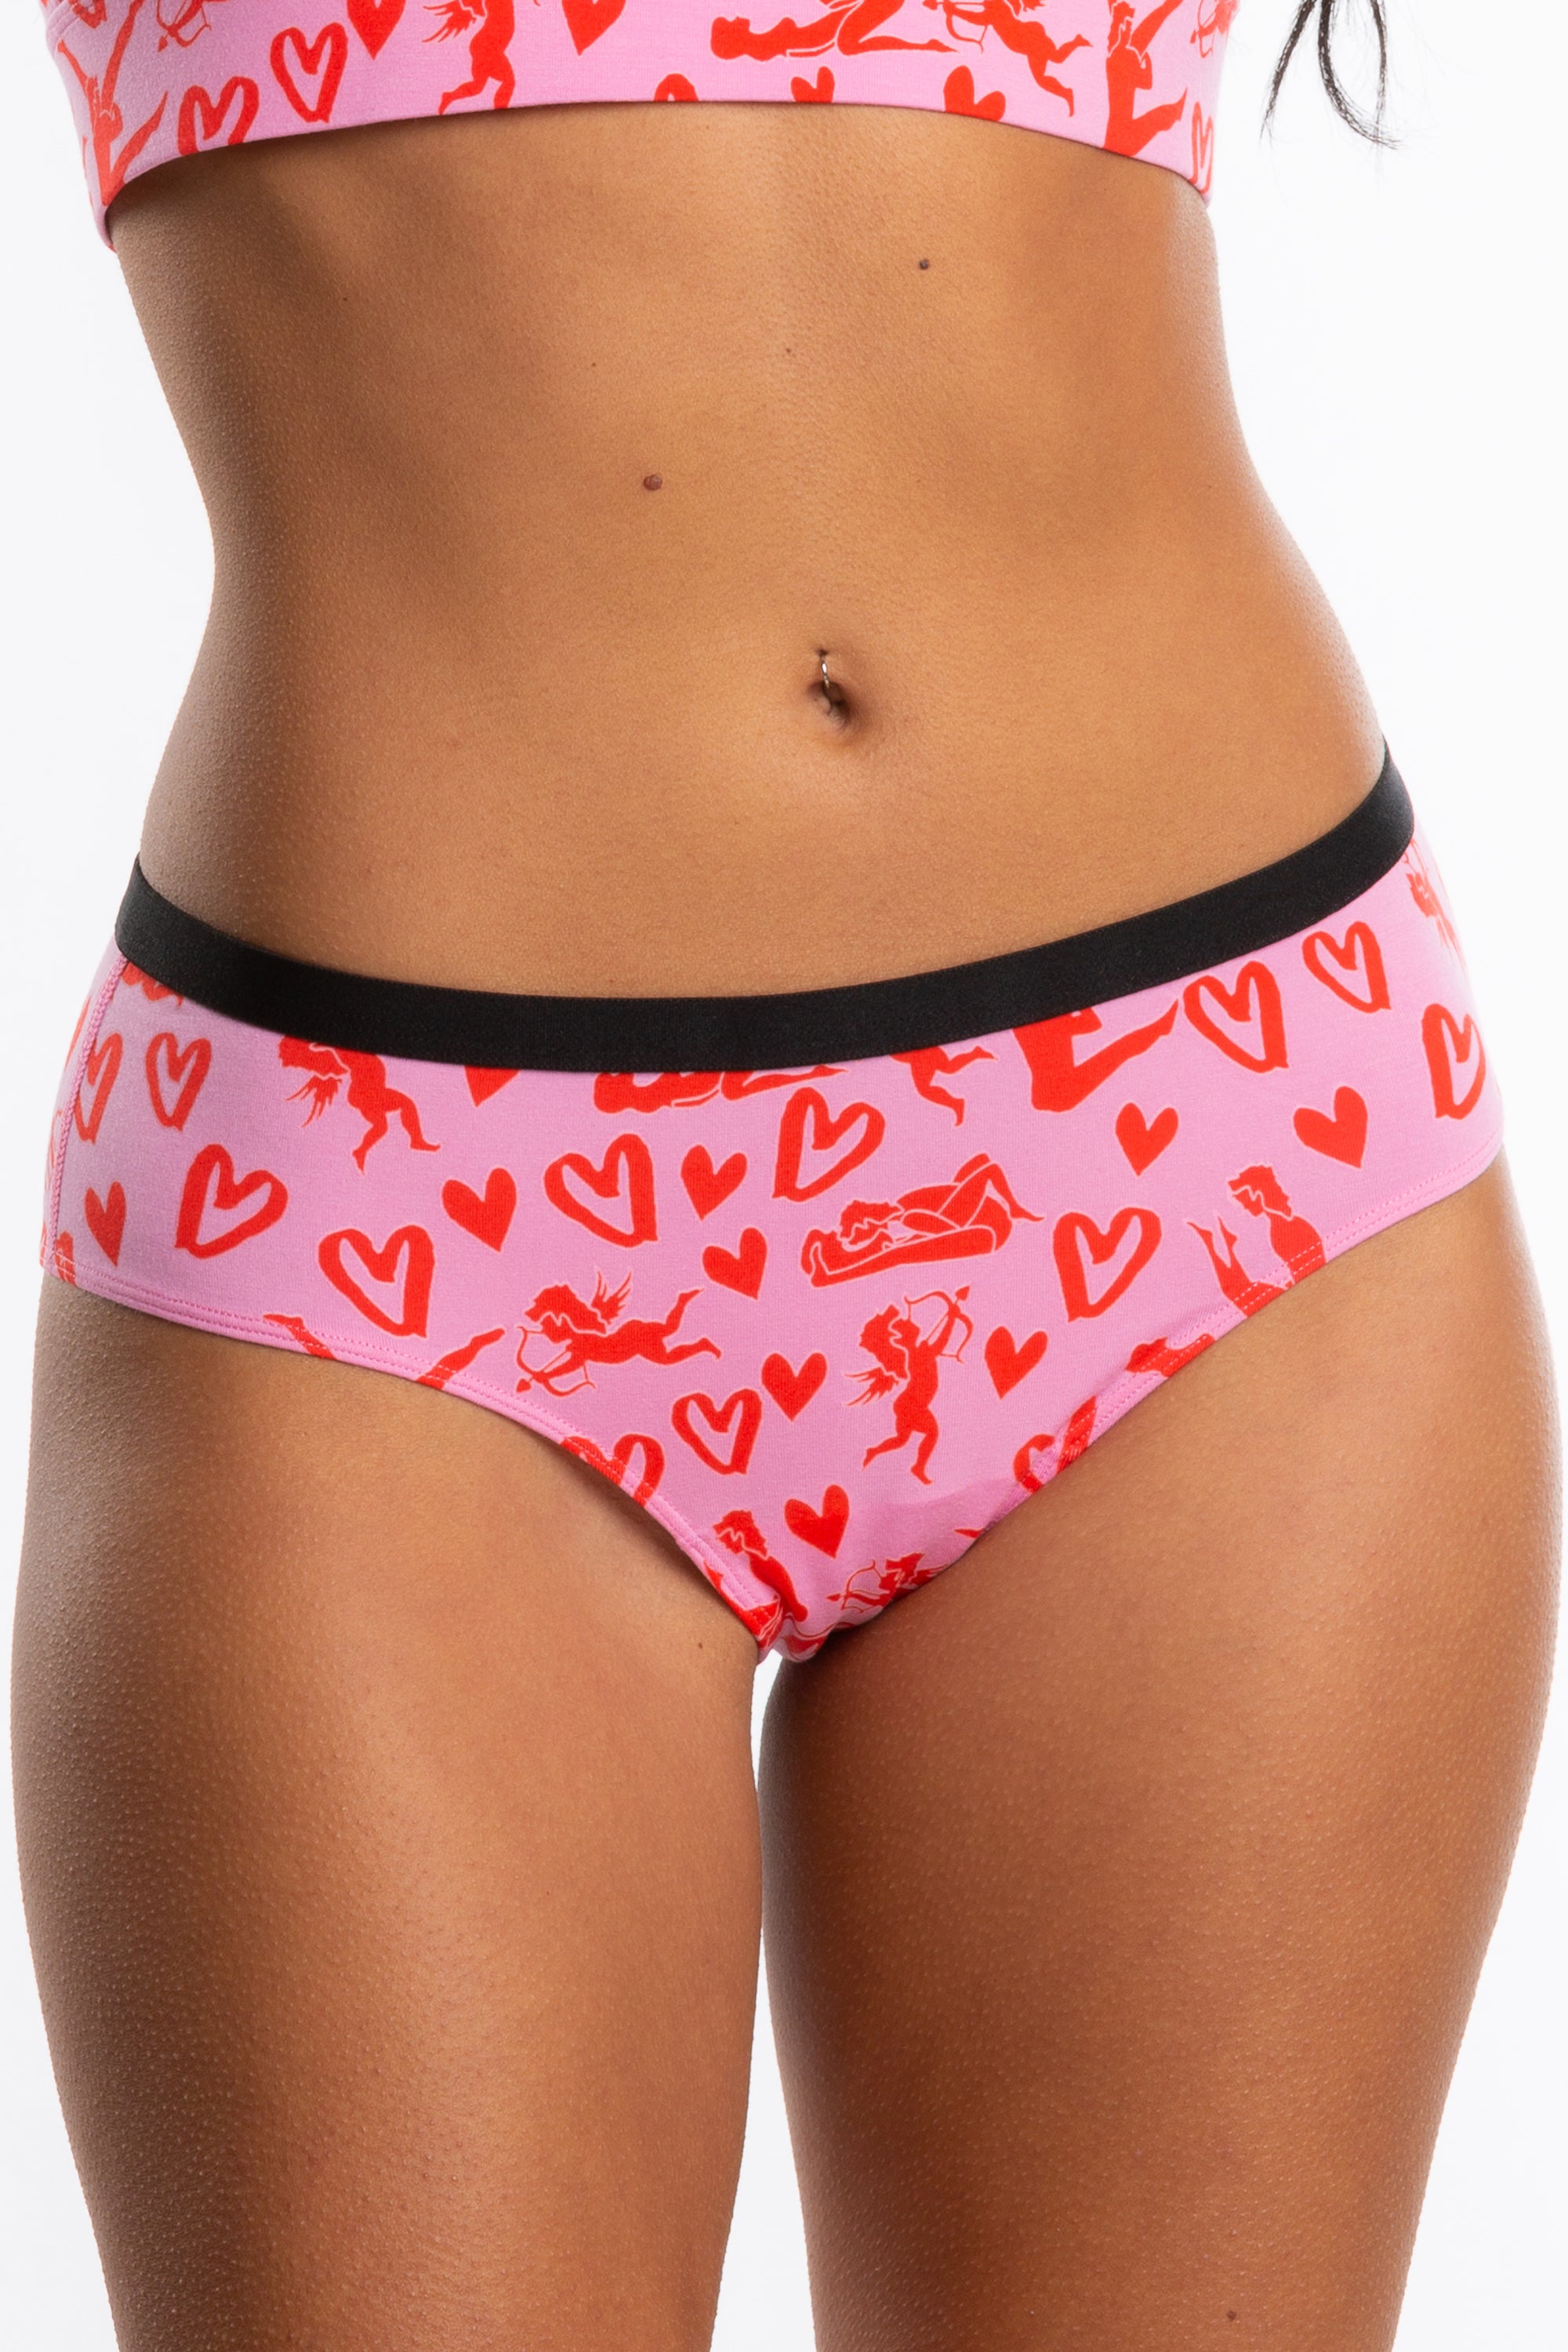 Valentine Underwear Gift for Girlfriend-funny Underwear-valentines Day Underwear  Women-booty Shorts Underwear Gifts for Wife Funny Knickers 